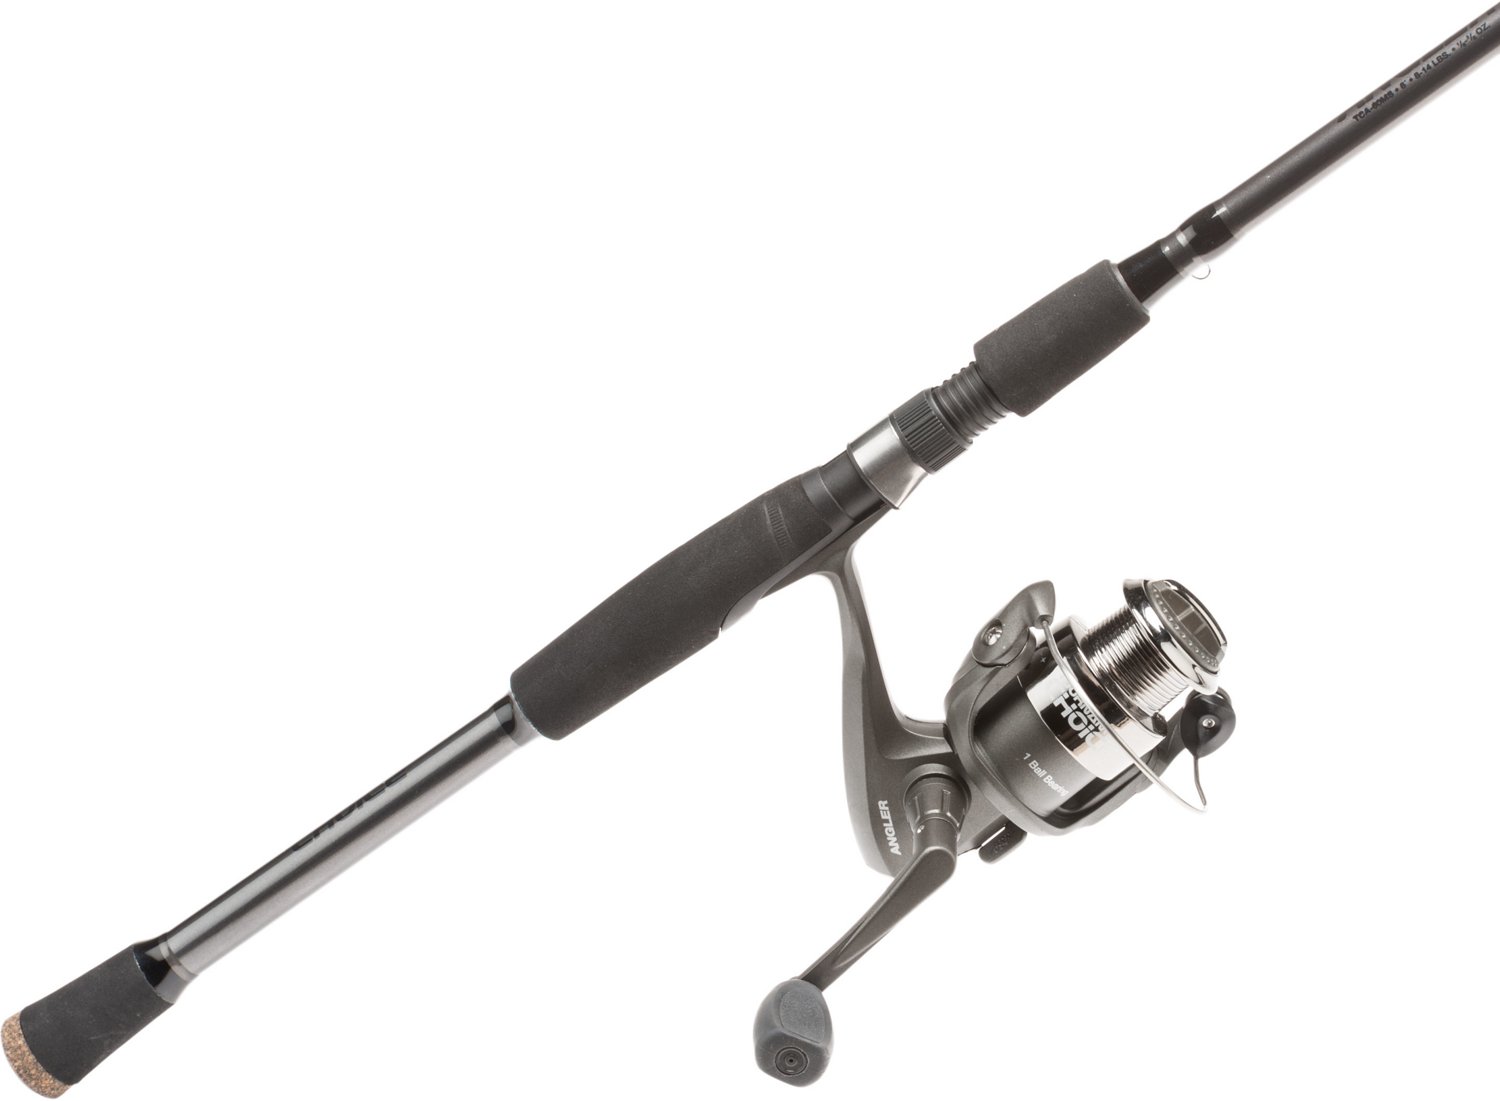 Tournament Choice® Angler 6' M Freshwater/Saltwater